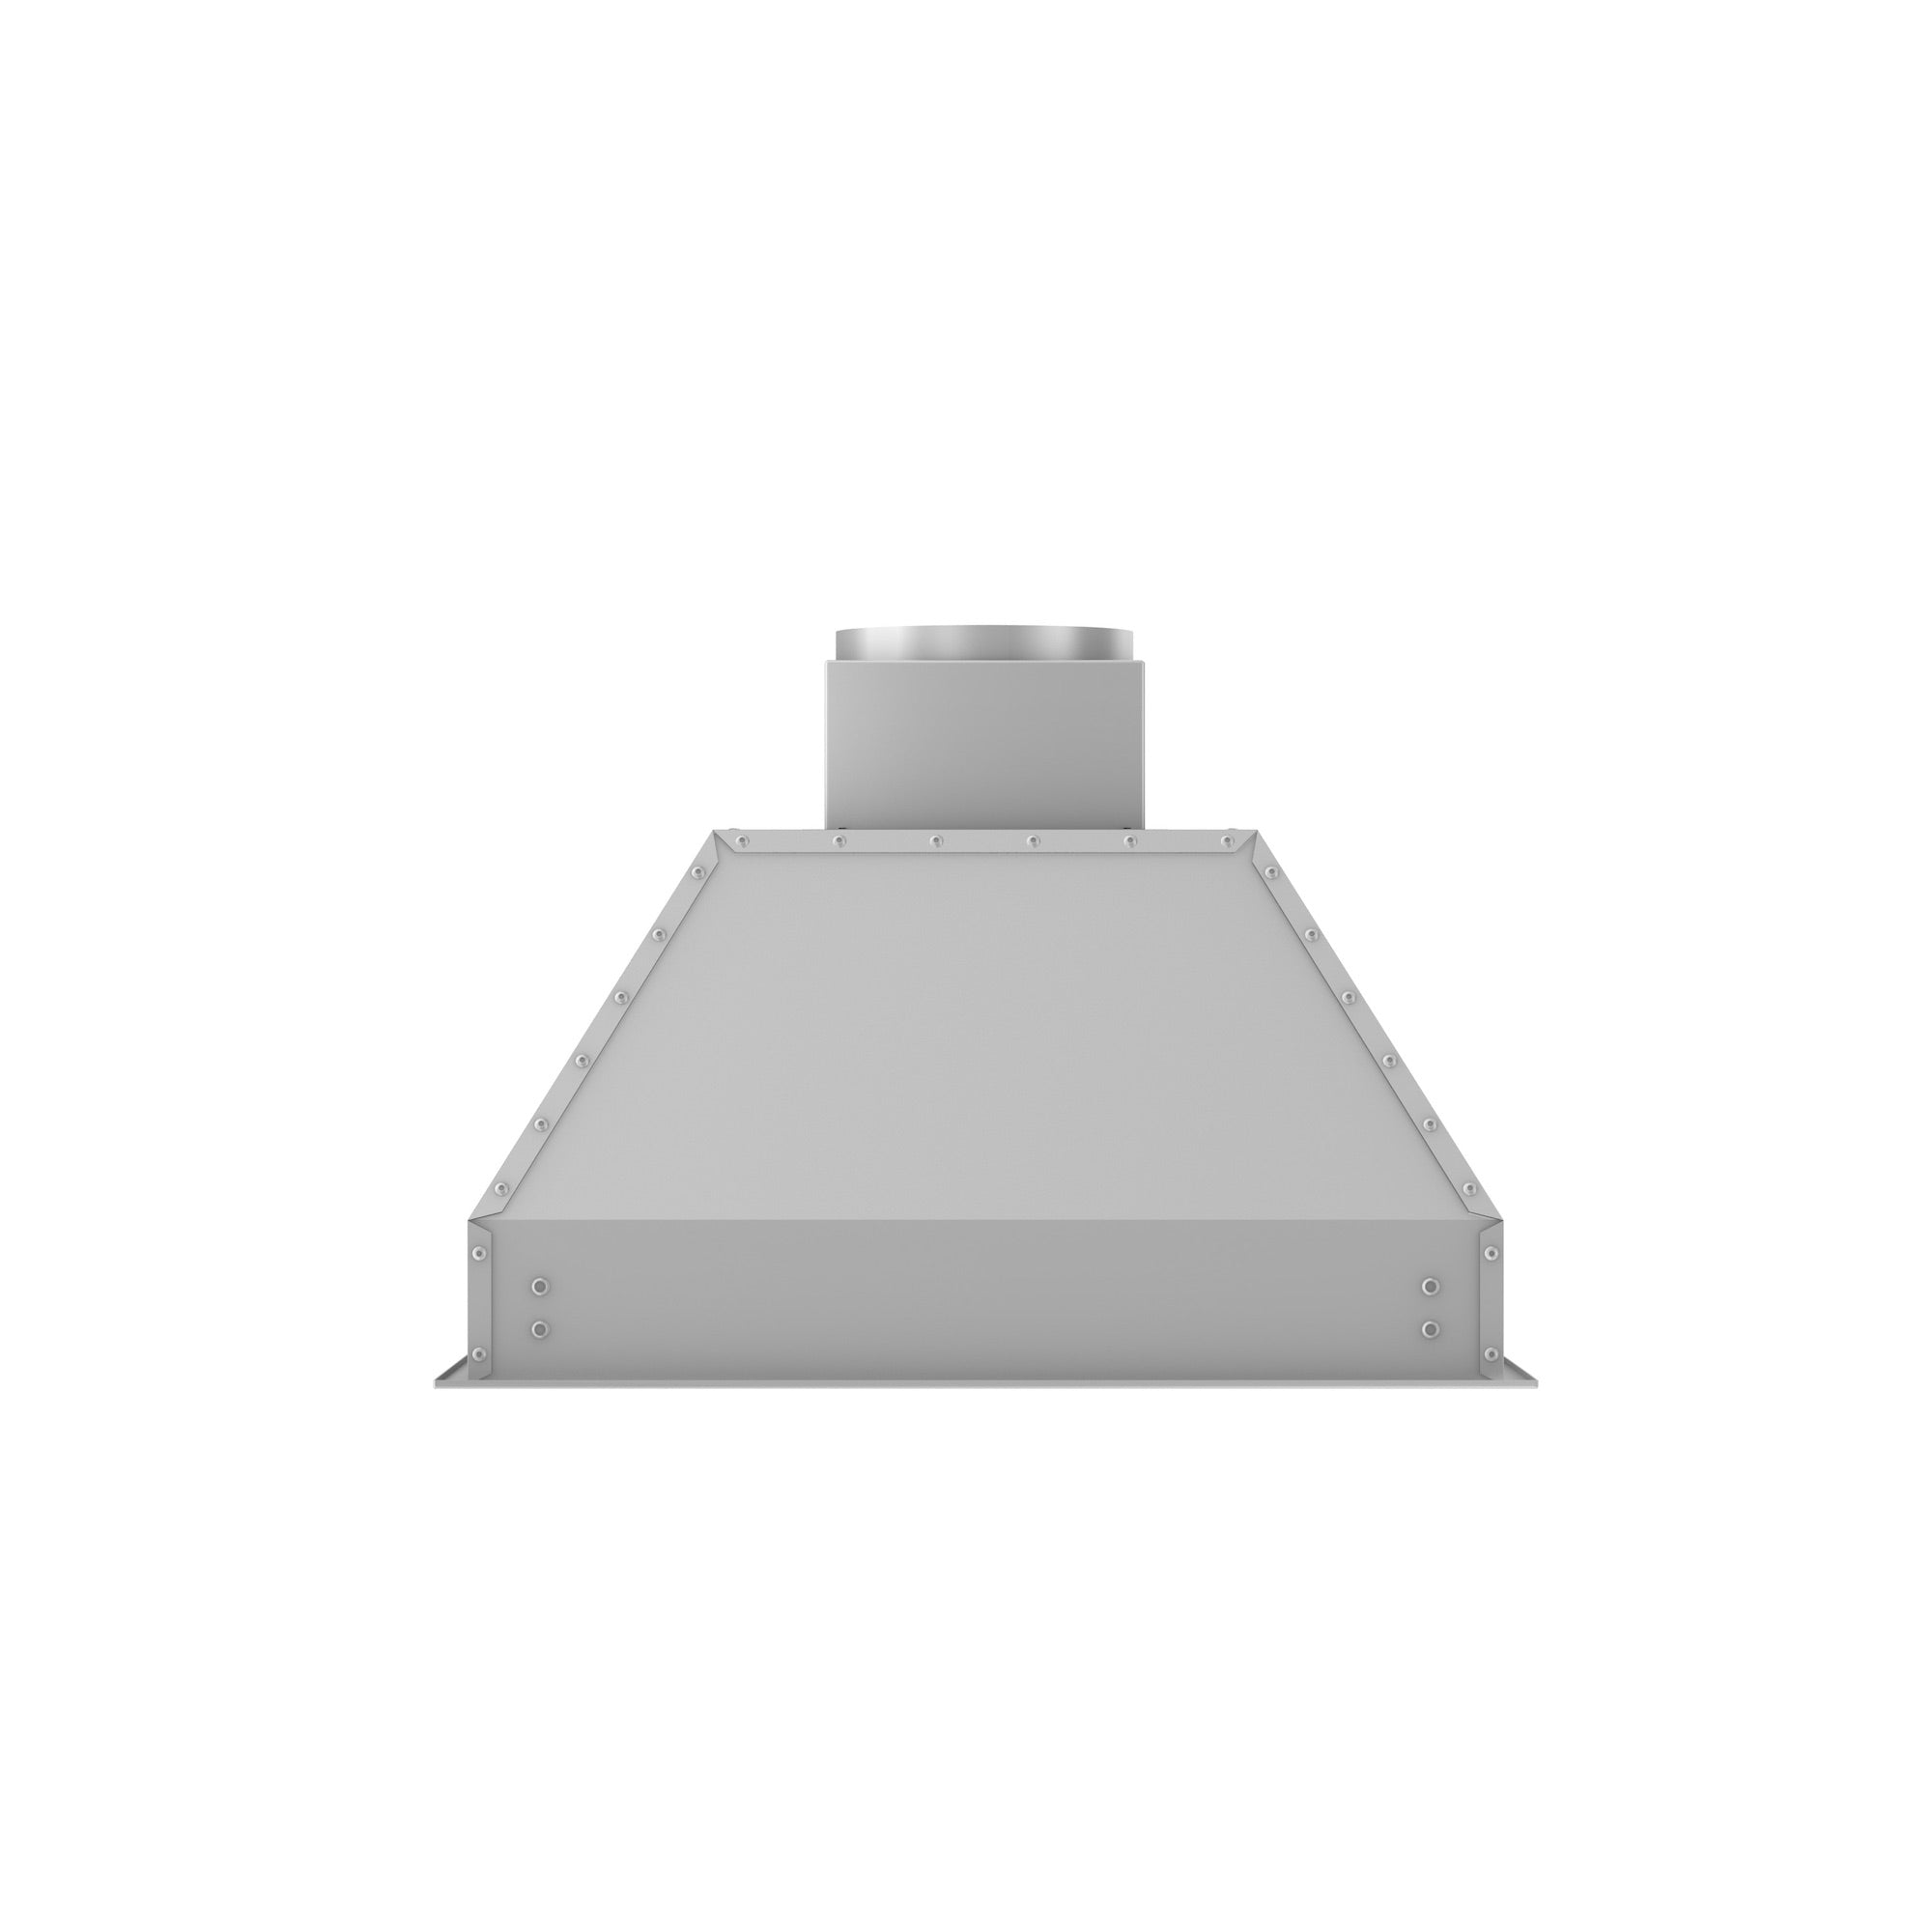 ZLINE 34" Ducted Remote Blower Range Hood Insert in Stainless Steel (698-RS-34-400)